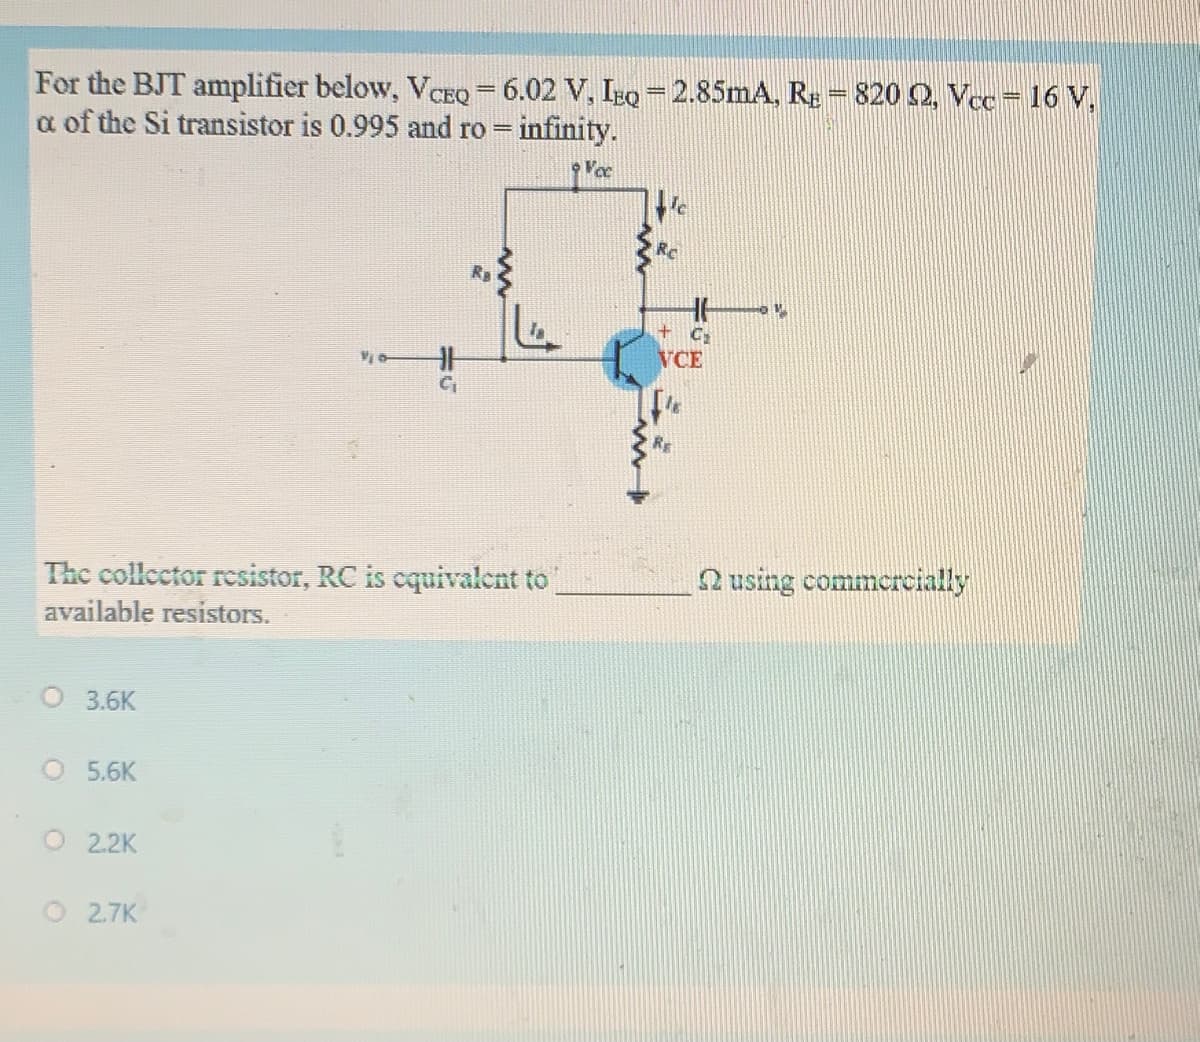 For the BJT amplifier below, VCEQ = 6.02 V, IzQ=2.85mA, RE=820 O, Vcc = 16 V,
a of the Si transistor is 0.995 and ro = infinity.
VCE
RE
The collector resistor, RC is cquivalent to
Q using commercially
available resistors.
O 3.6K
O 5.6K
O2.2K
O2.7K
